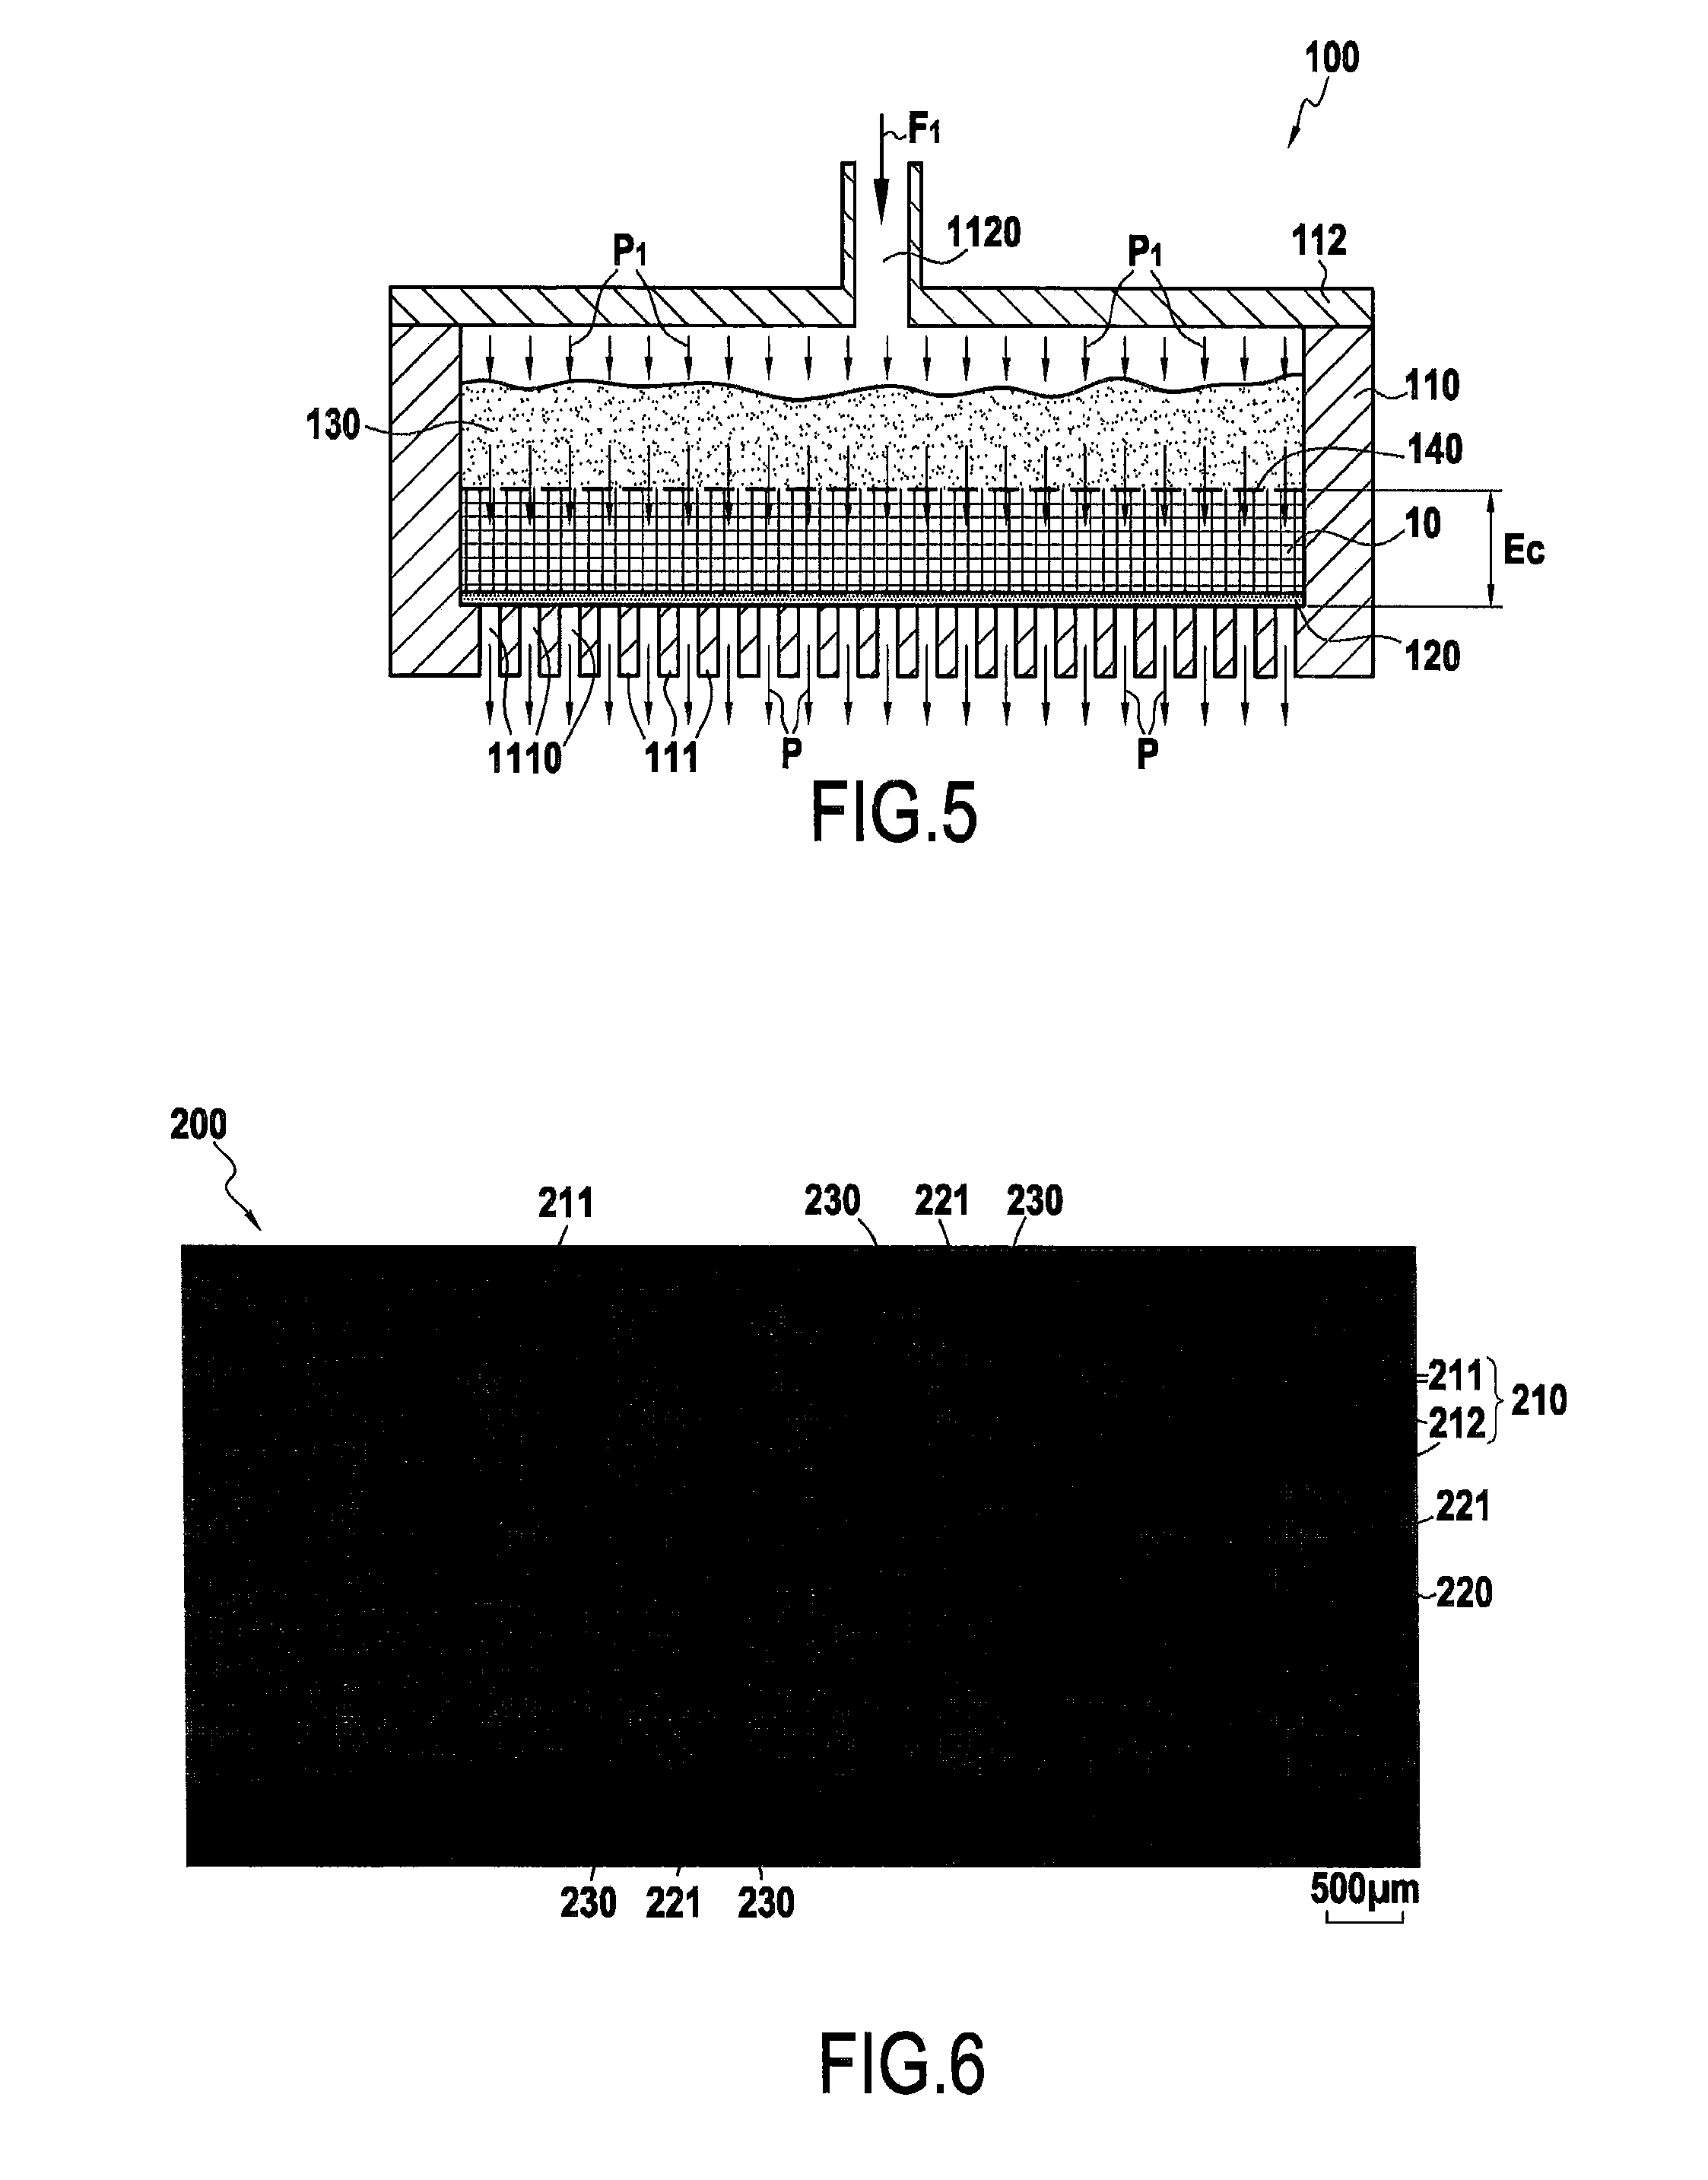 Part made from oxide/oxide composite material for 3-d reinforcing and method for manufacture of same